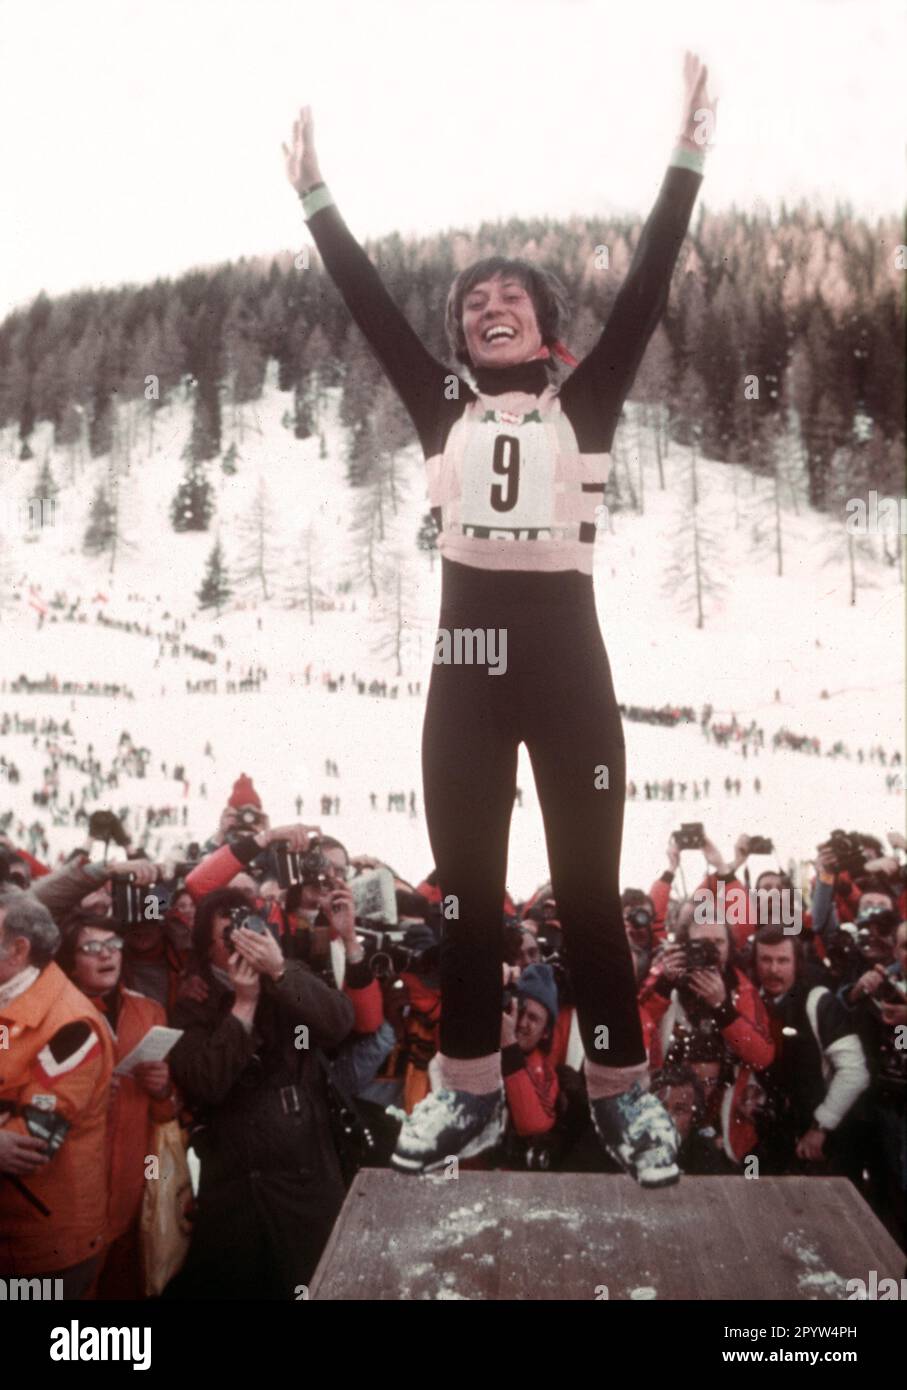 Winter Olympics in Innsbruck 1976. Rosi Mittermaier (Deut.) cheers after her victory in the downhill race Feb. 13, 1976. [automated translation] Stock Photo